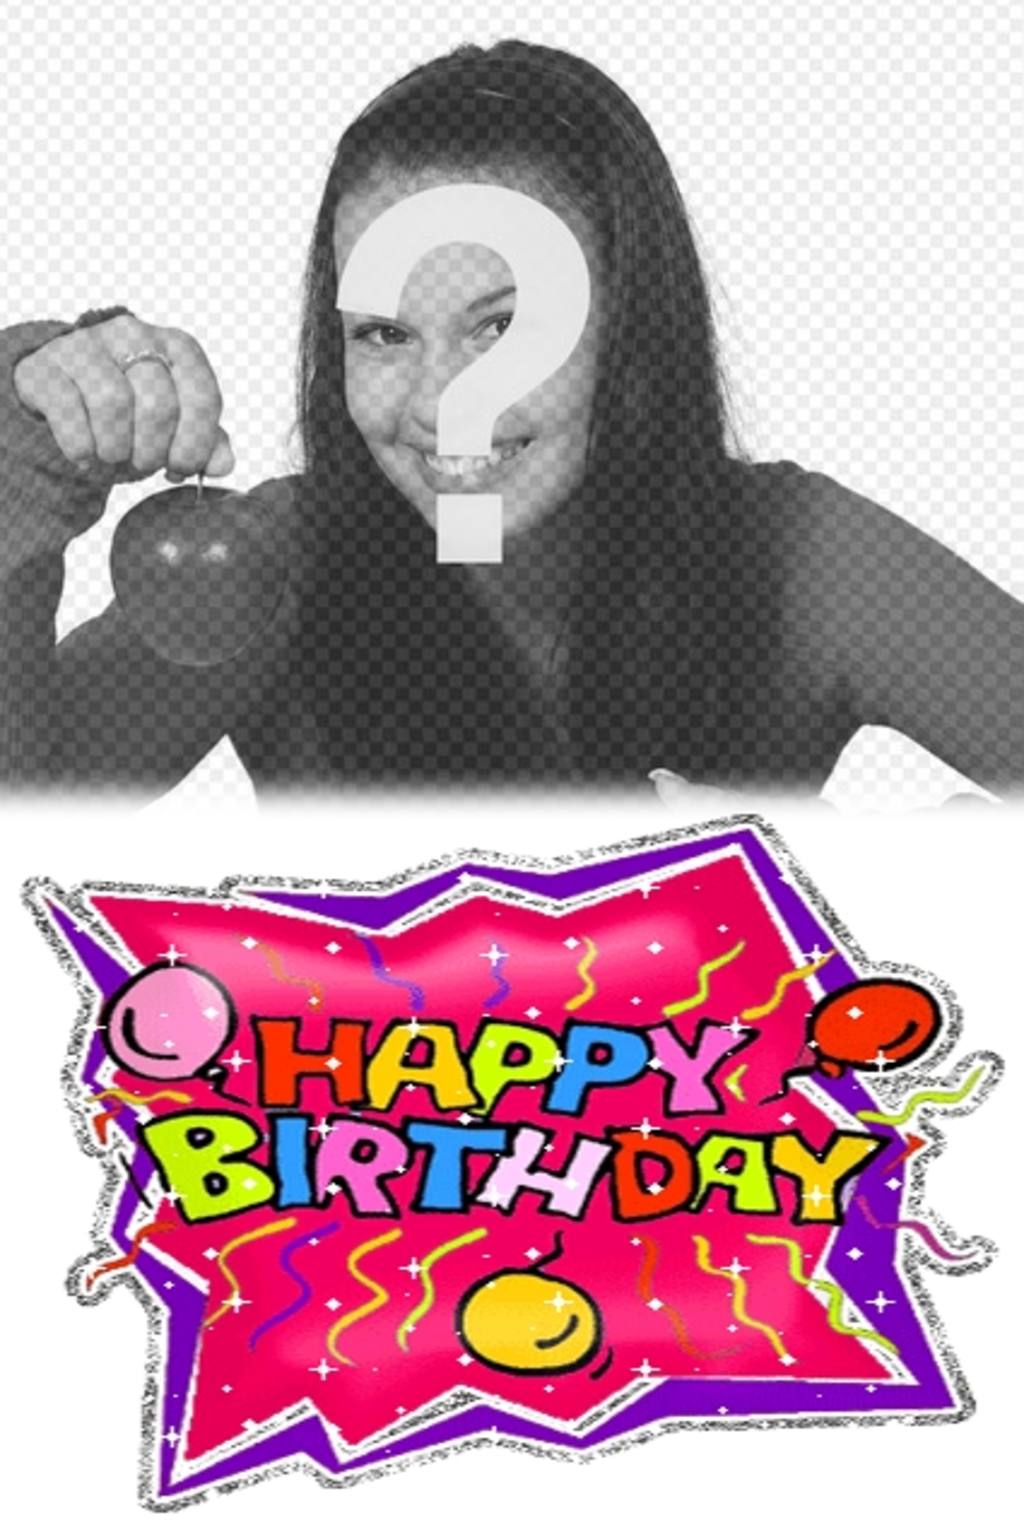 Create your own personalized birthday card with a picture! Use it to wish a happy birthday card or as a..